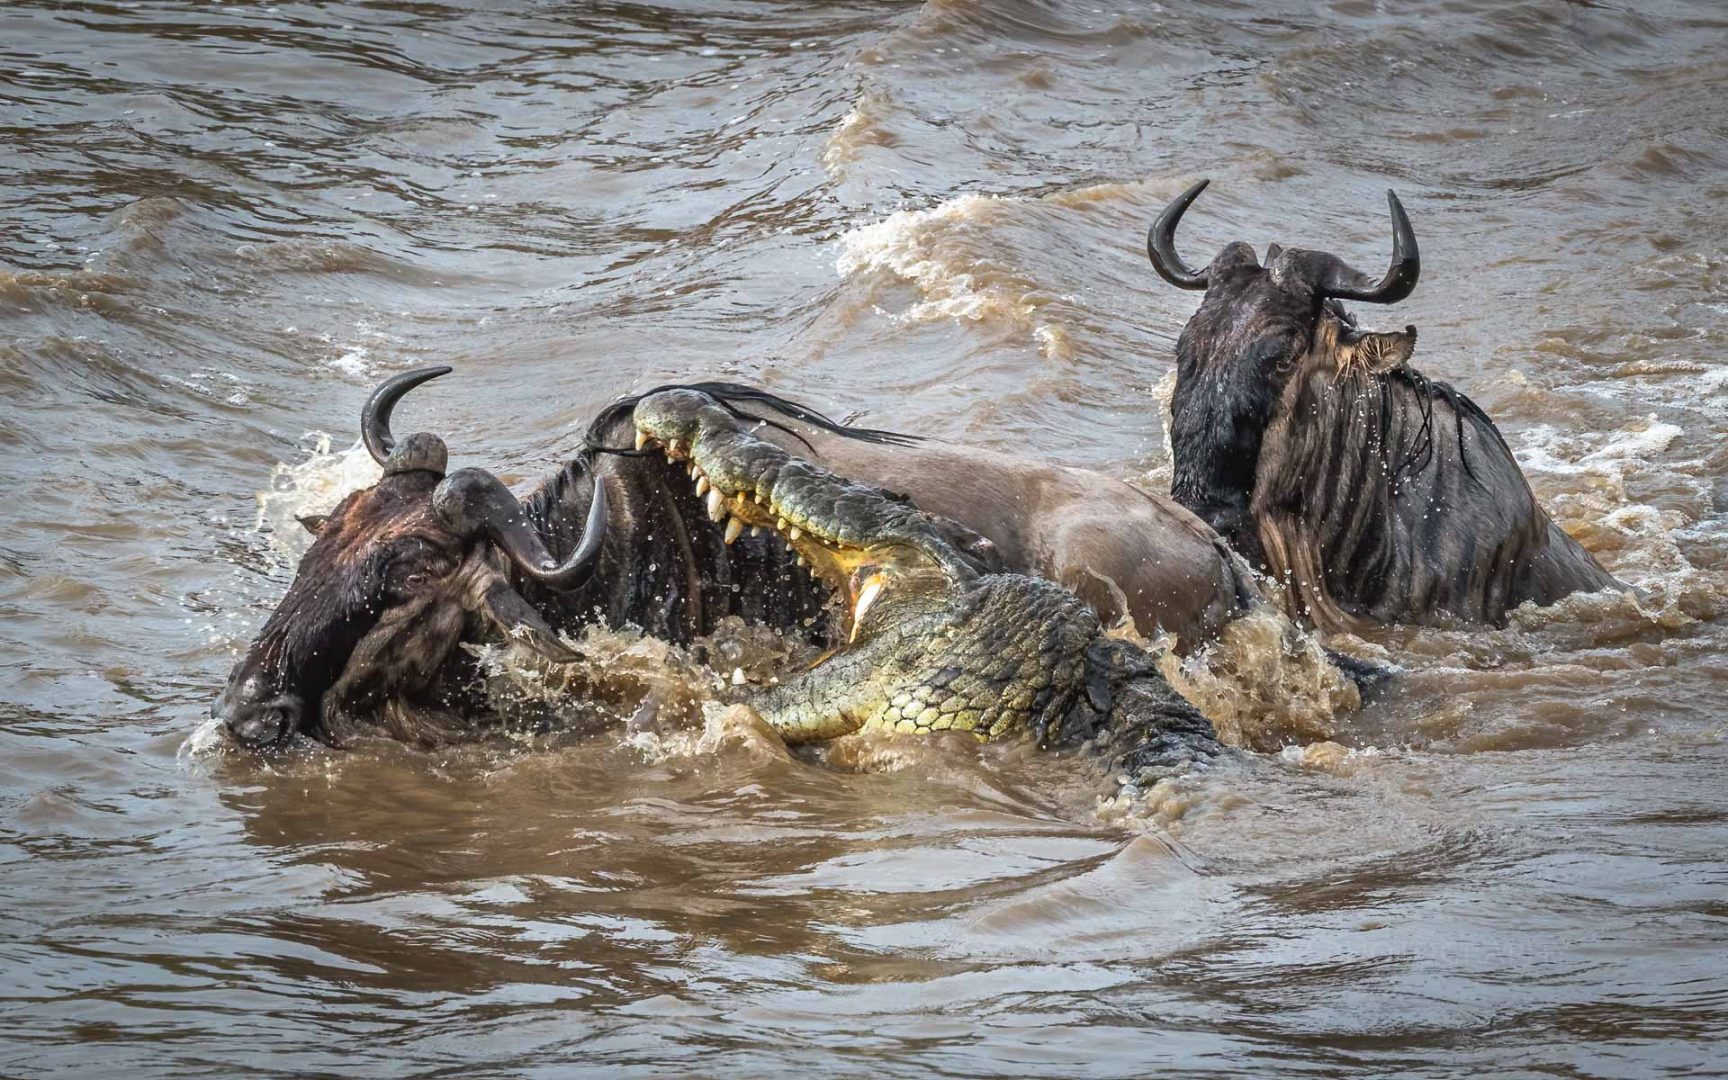 Crocodile attack during river crossing at number 5 in Serengeti